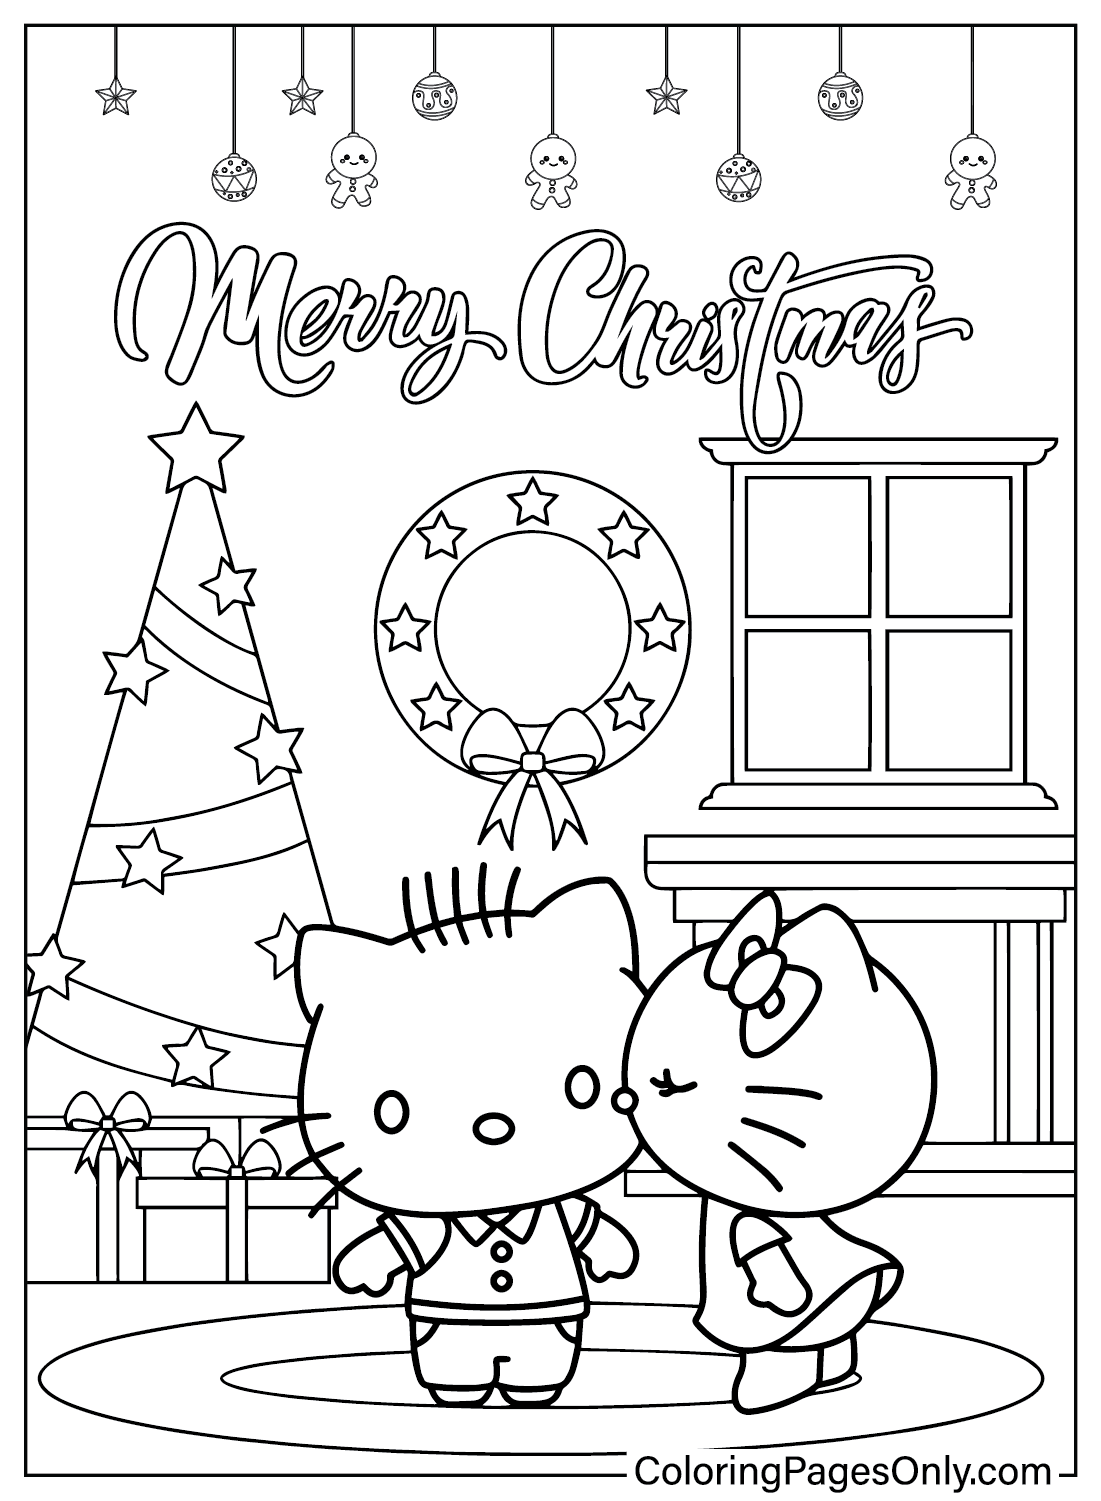 Coloring pages only on x â hello kitty coloring pages ðïð httpstcomrleuybzsj hellokitty sanrio coloringpagesonly coloringpages coloringbook art fanart sketch drawing draw coloring usa trend trending trendingnow